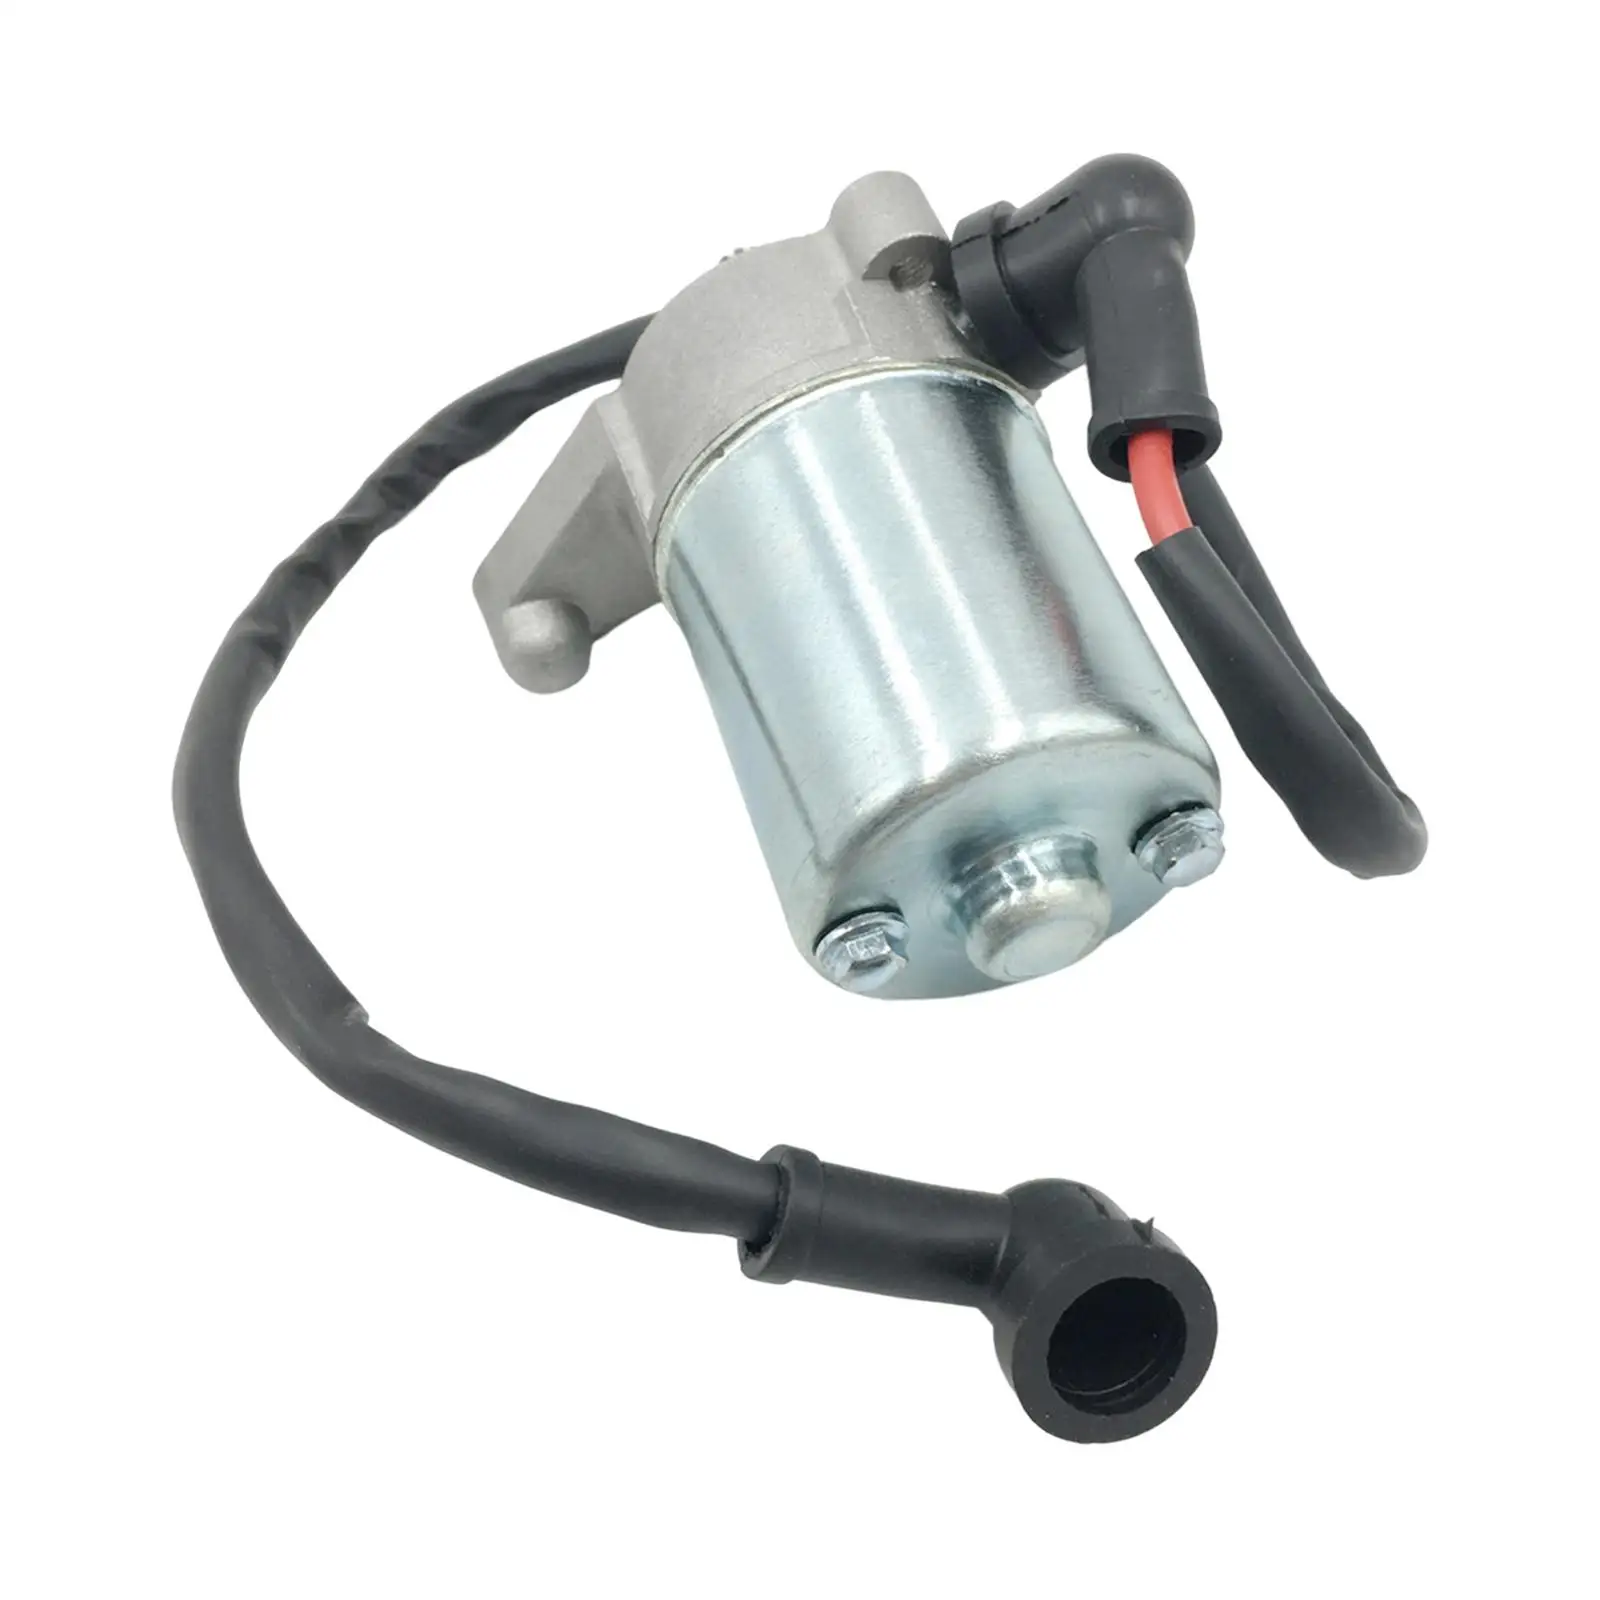 Motorcycle Starter Motor Replaces Accessories Spare Parts for Tdr125 DT125x